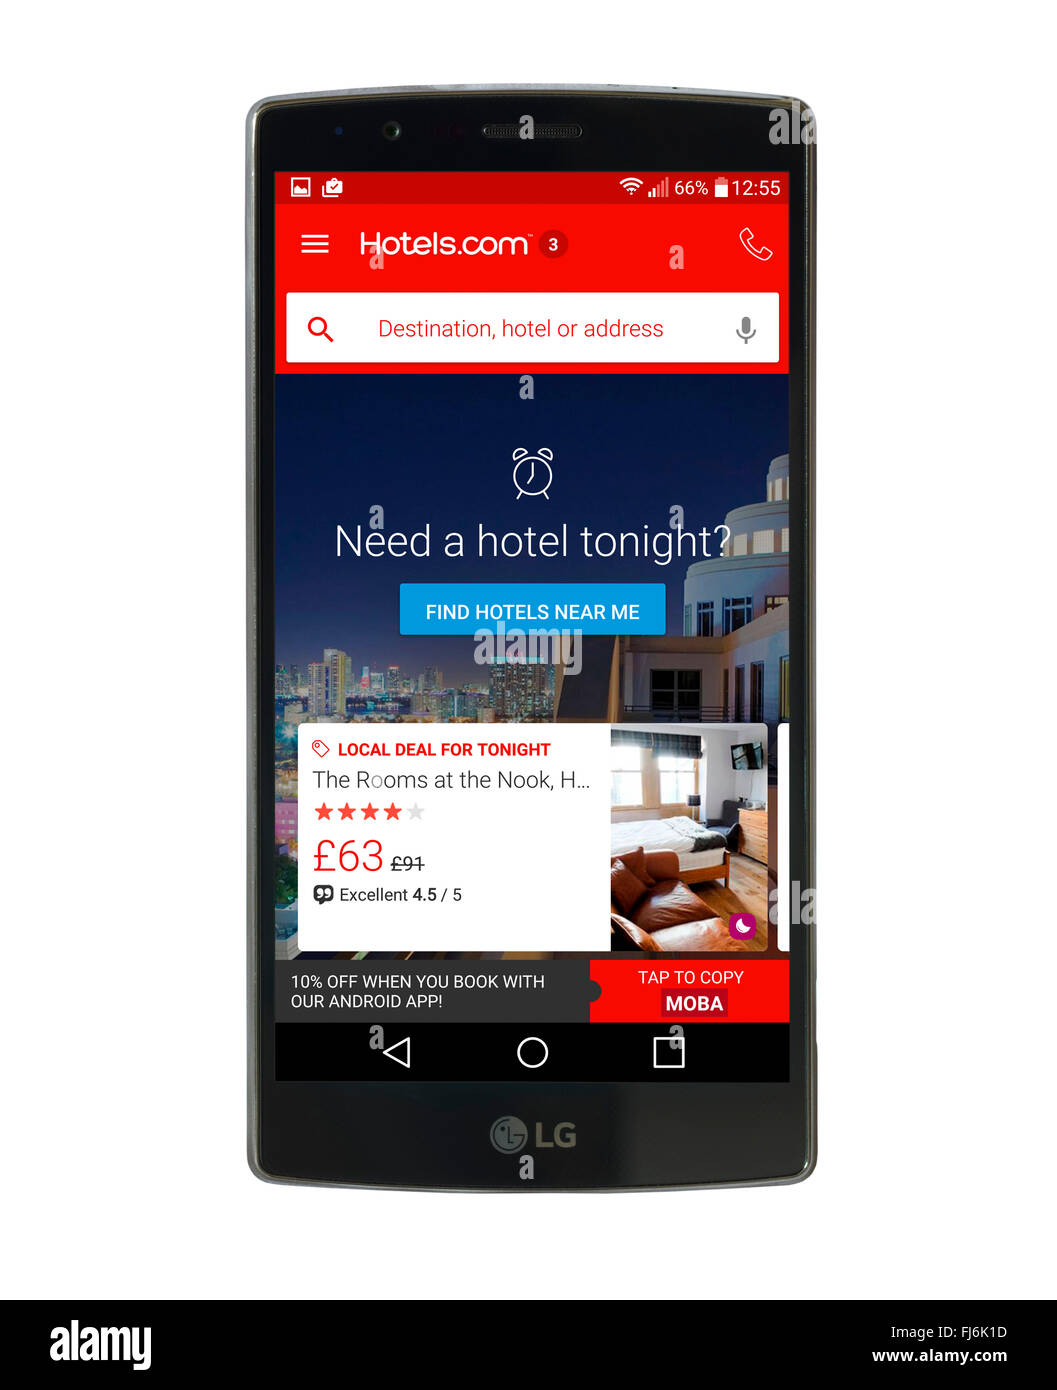 Hotels.com app on an LG G4 5.5 inch Android smartphone Stock Photo